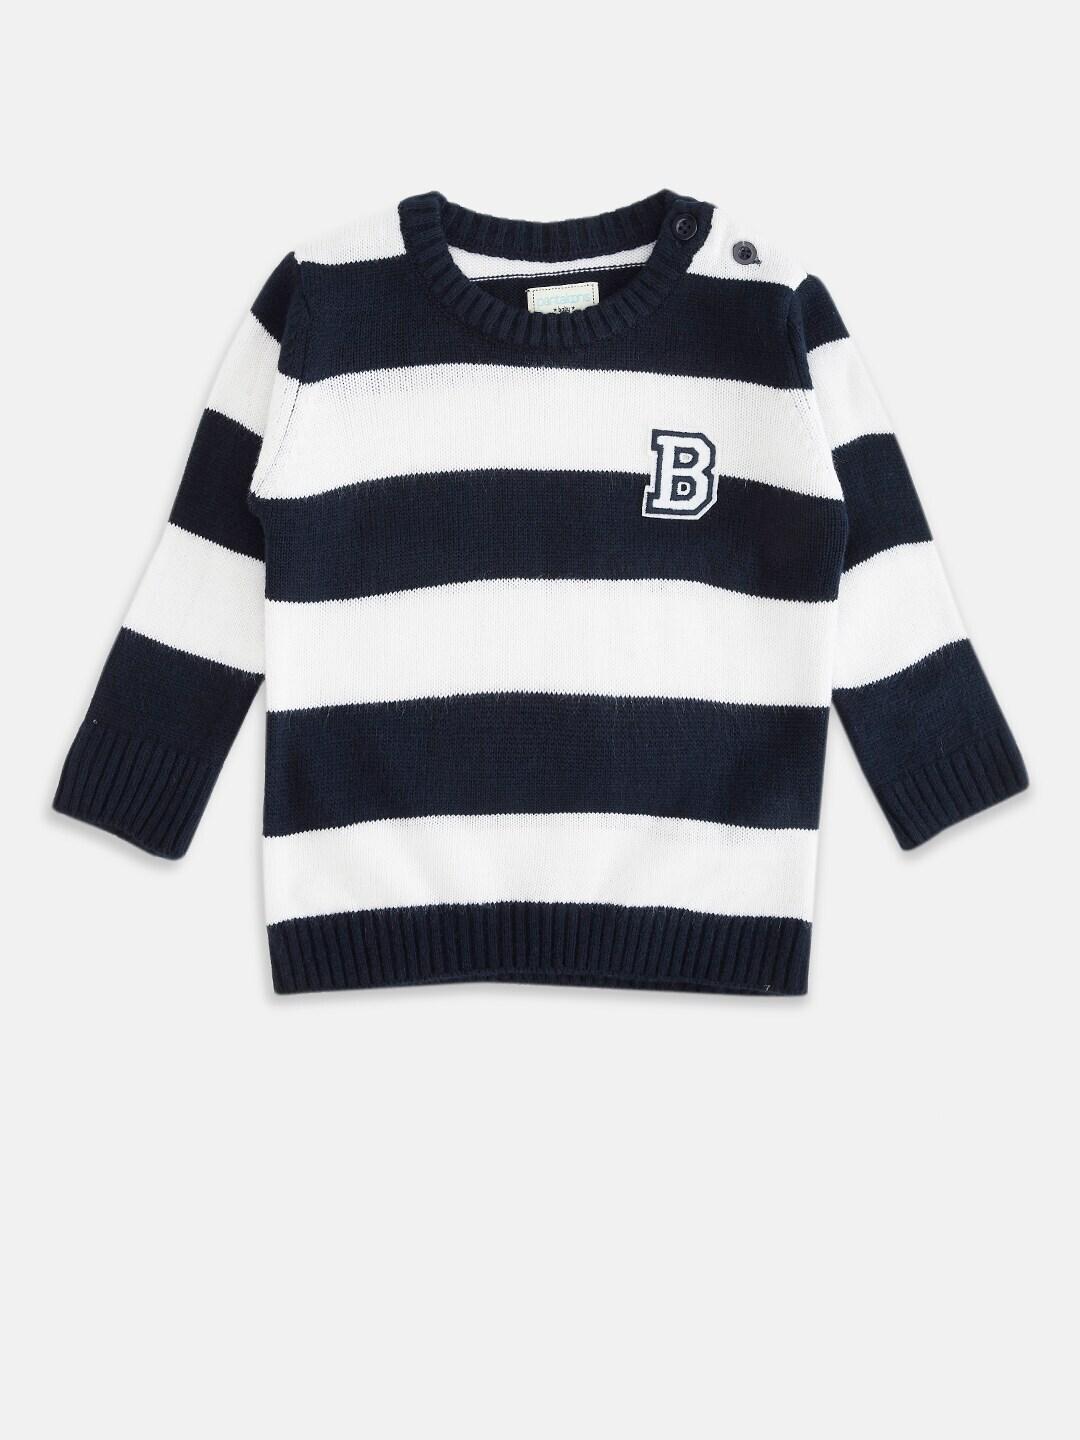 pantaloons-baby-boys-navy-blue-&-white-striped-pullover